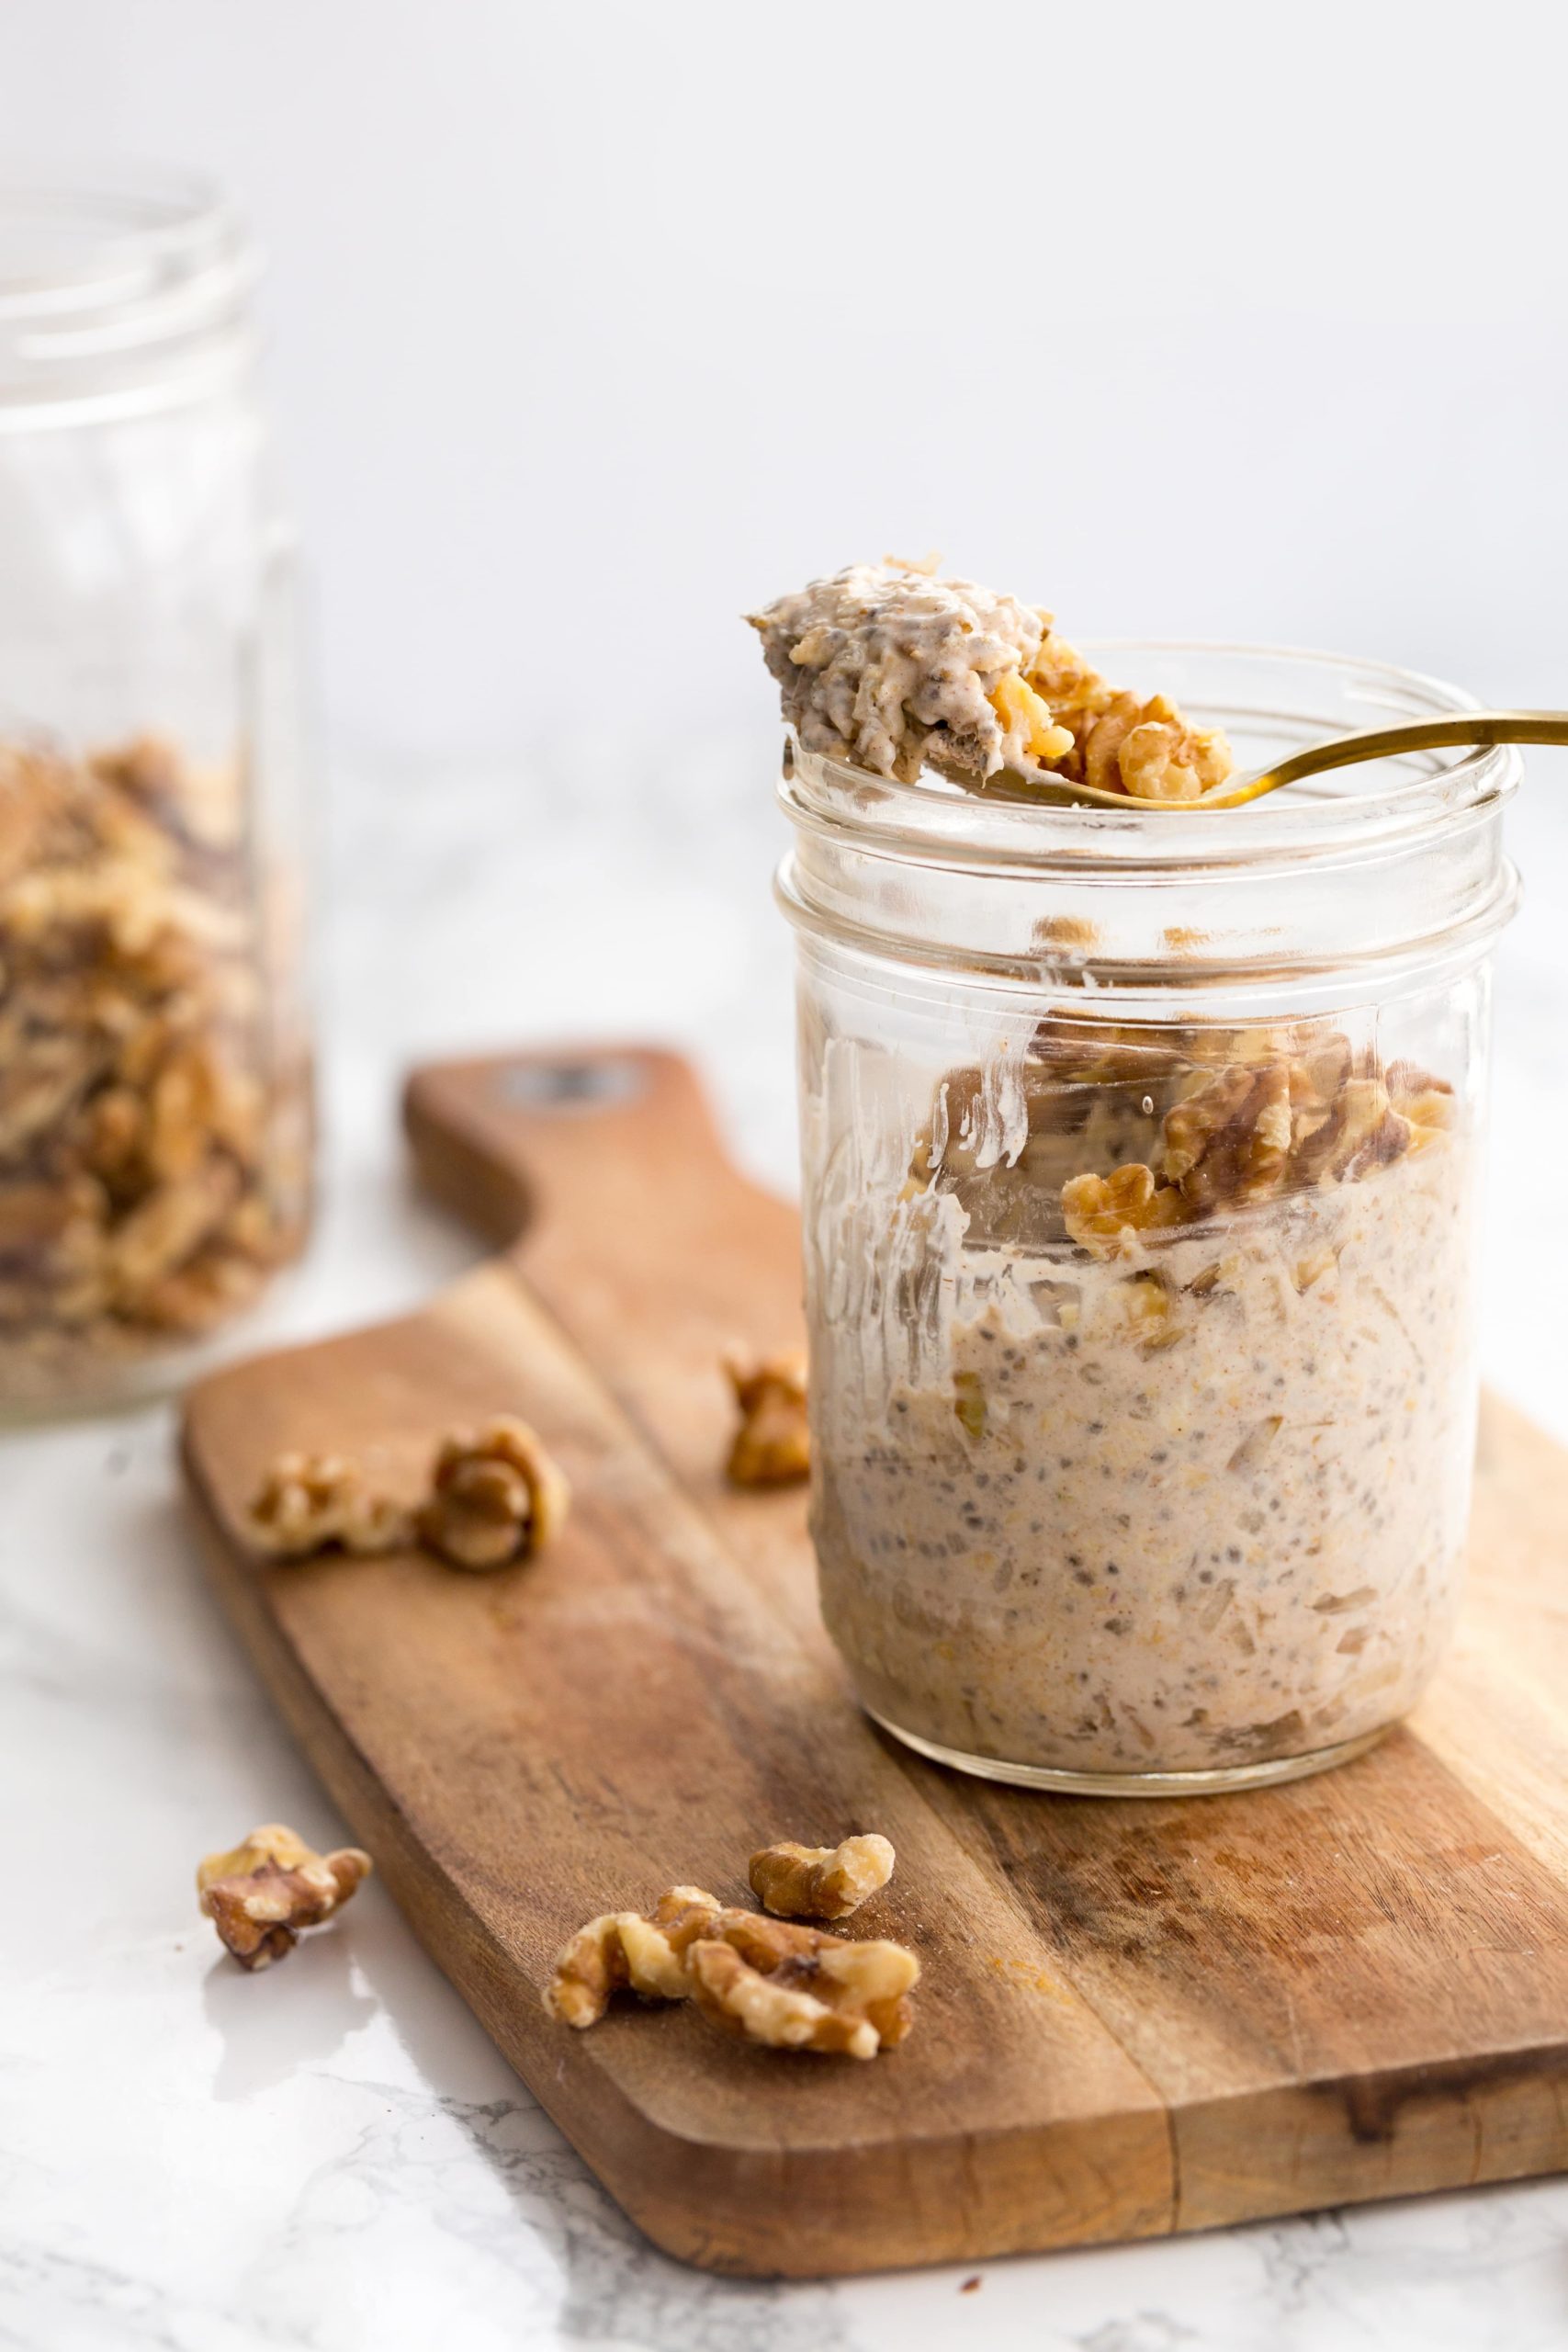 Spiced Pear Overnight Oats - Inspiralized